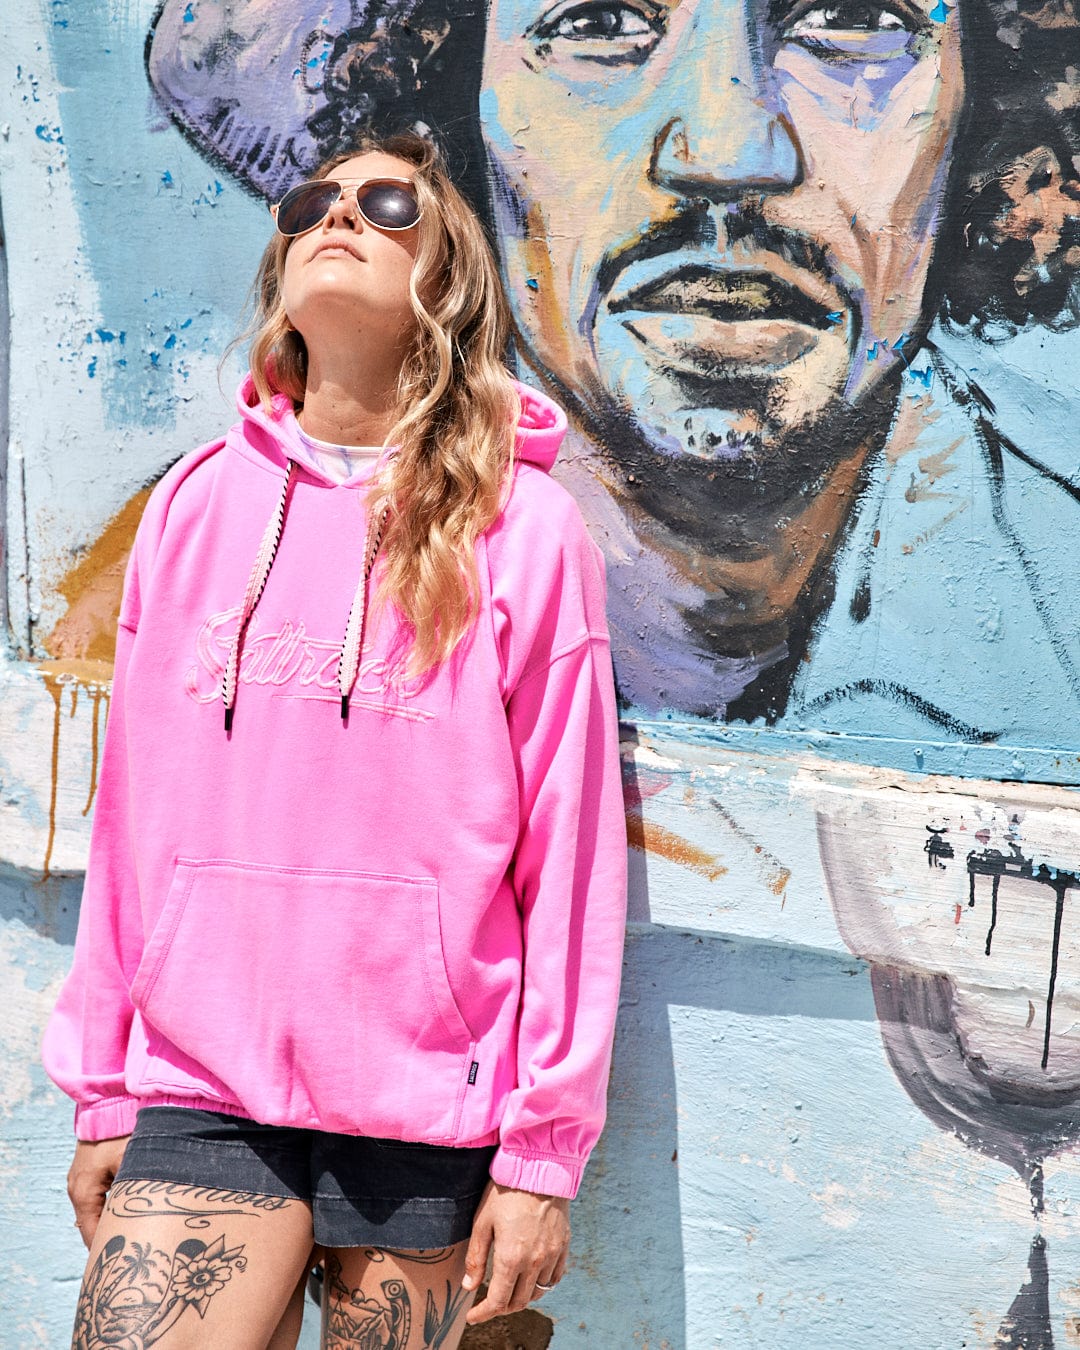 A person in an Instow - Womens Pop Hoodie - Pink and sunglasses, featuring an elasticated waist from Saltrock, stands in front of a mural featuring a man's face.